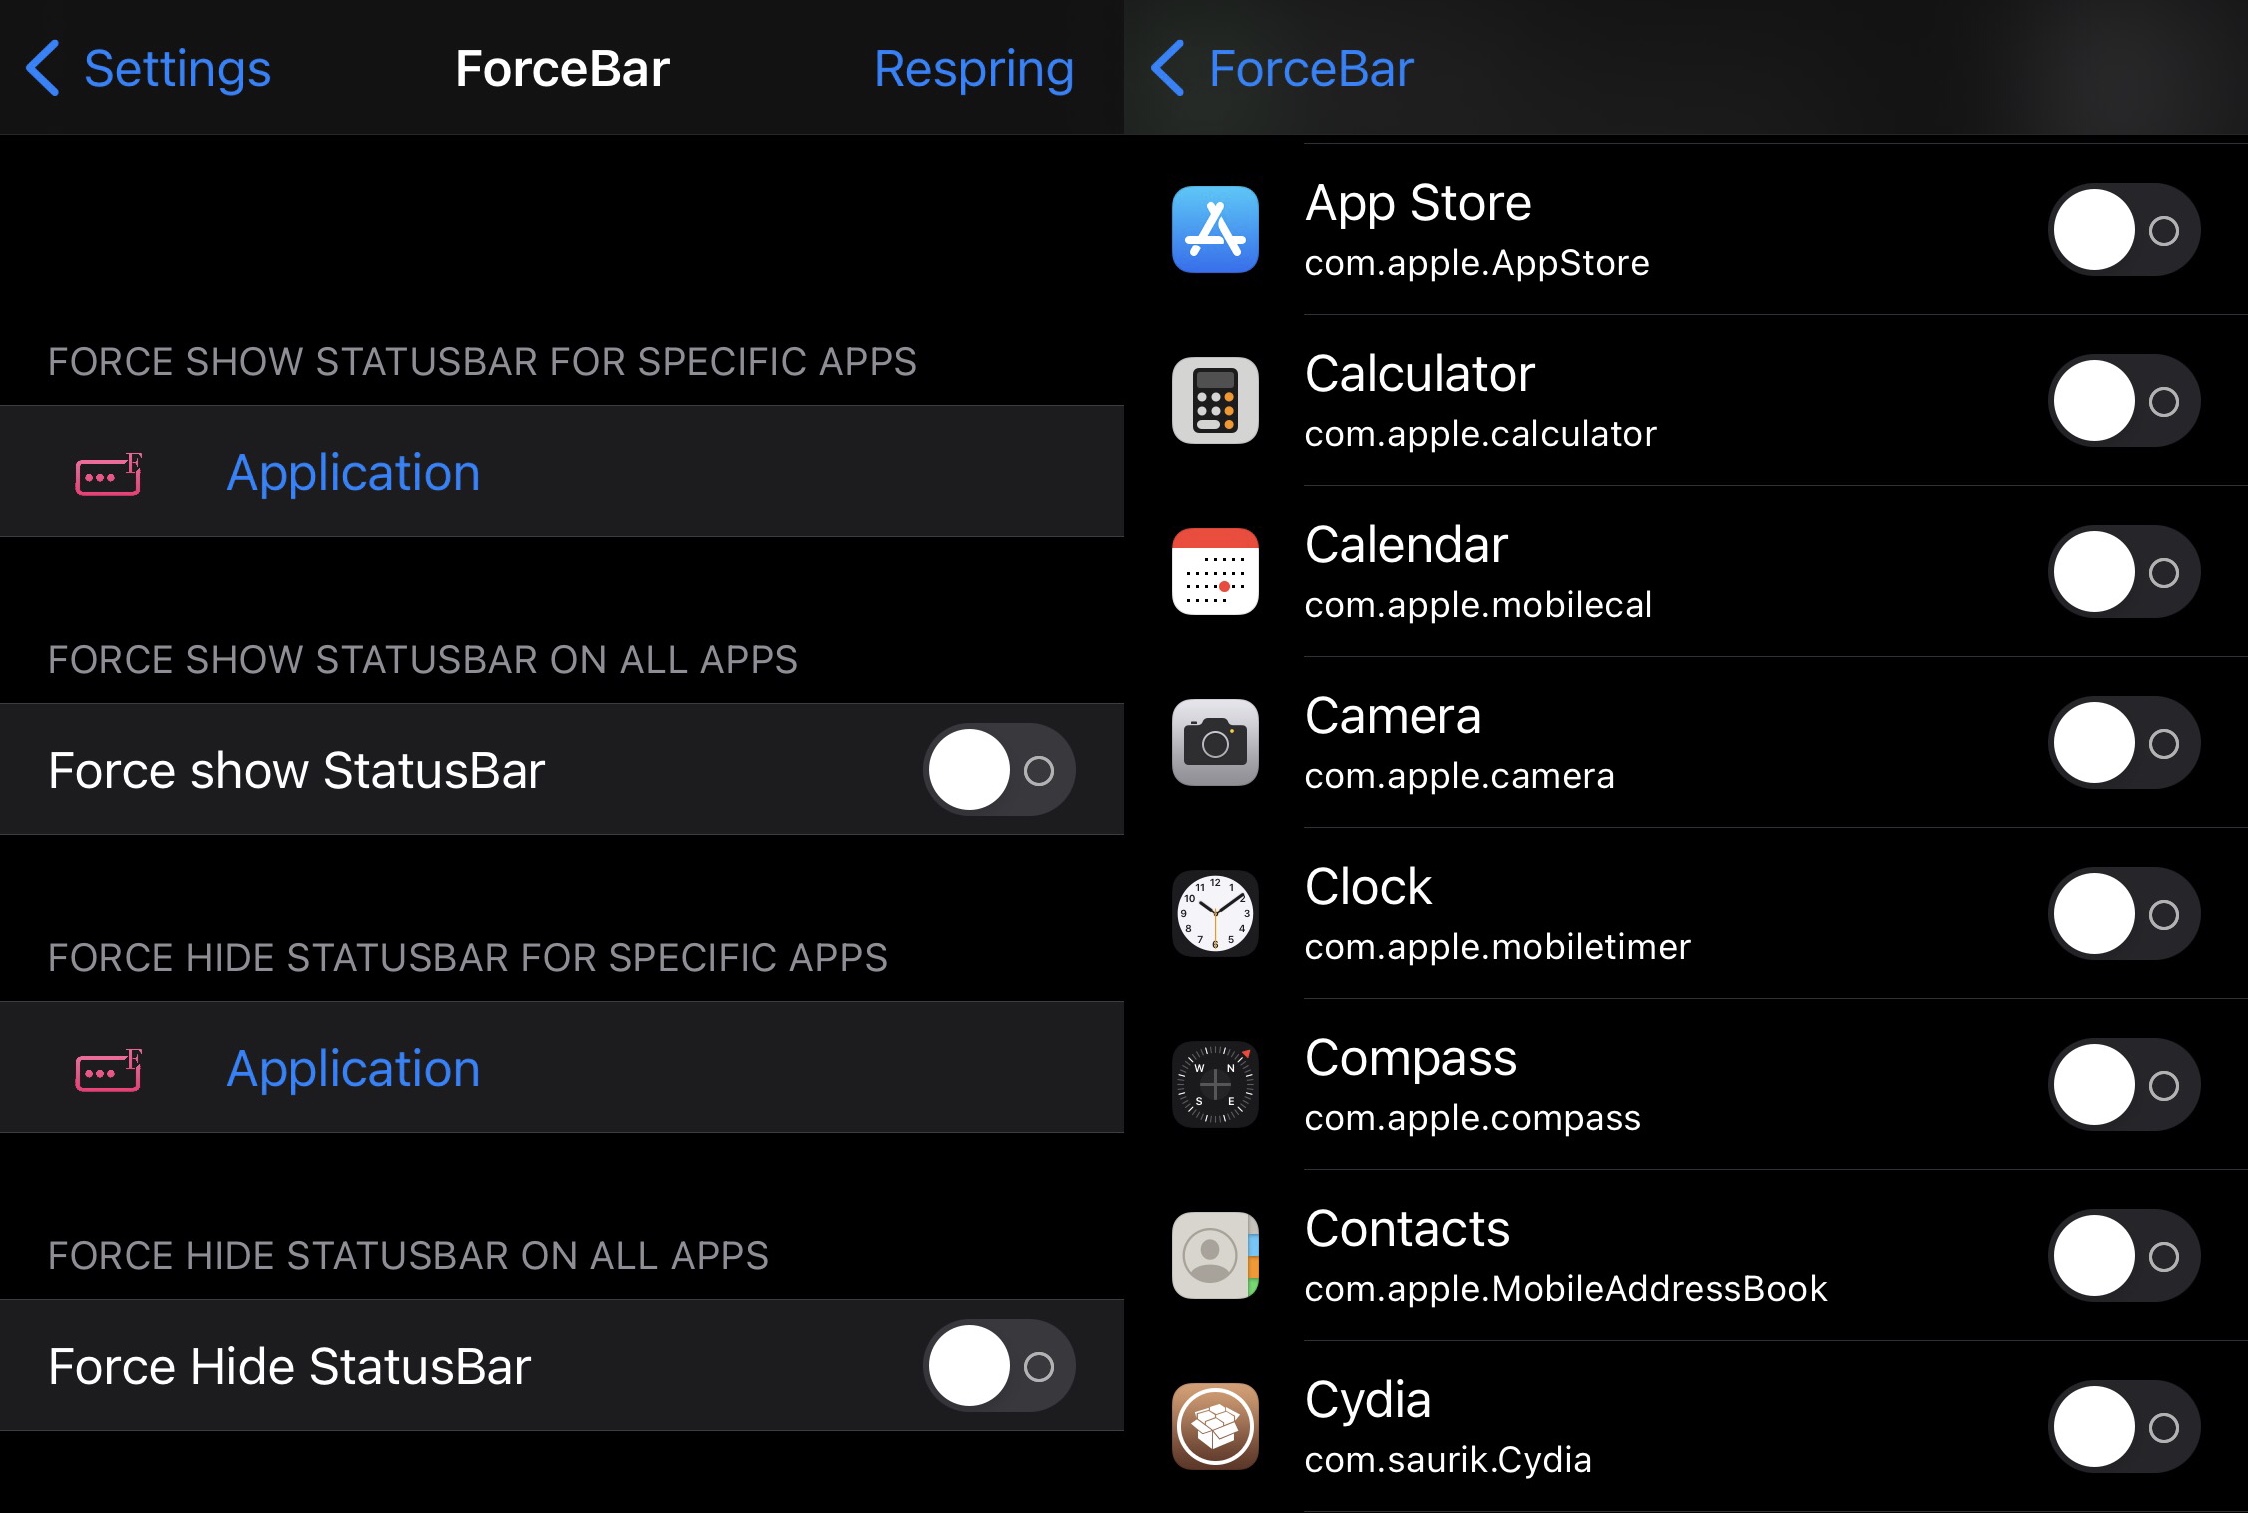 You can use ForceBar to hide or show the Status Bar in specific apps.